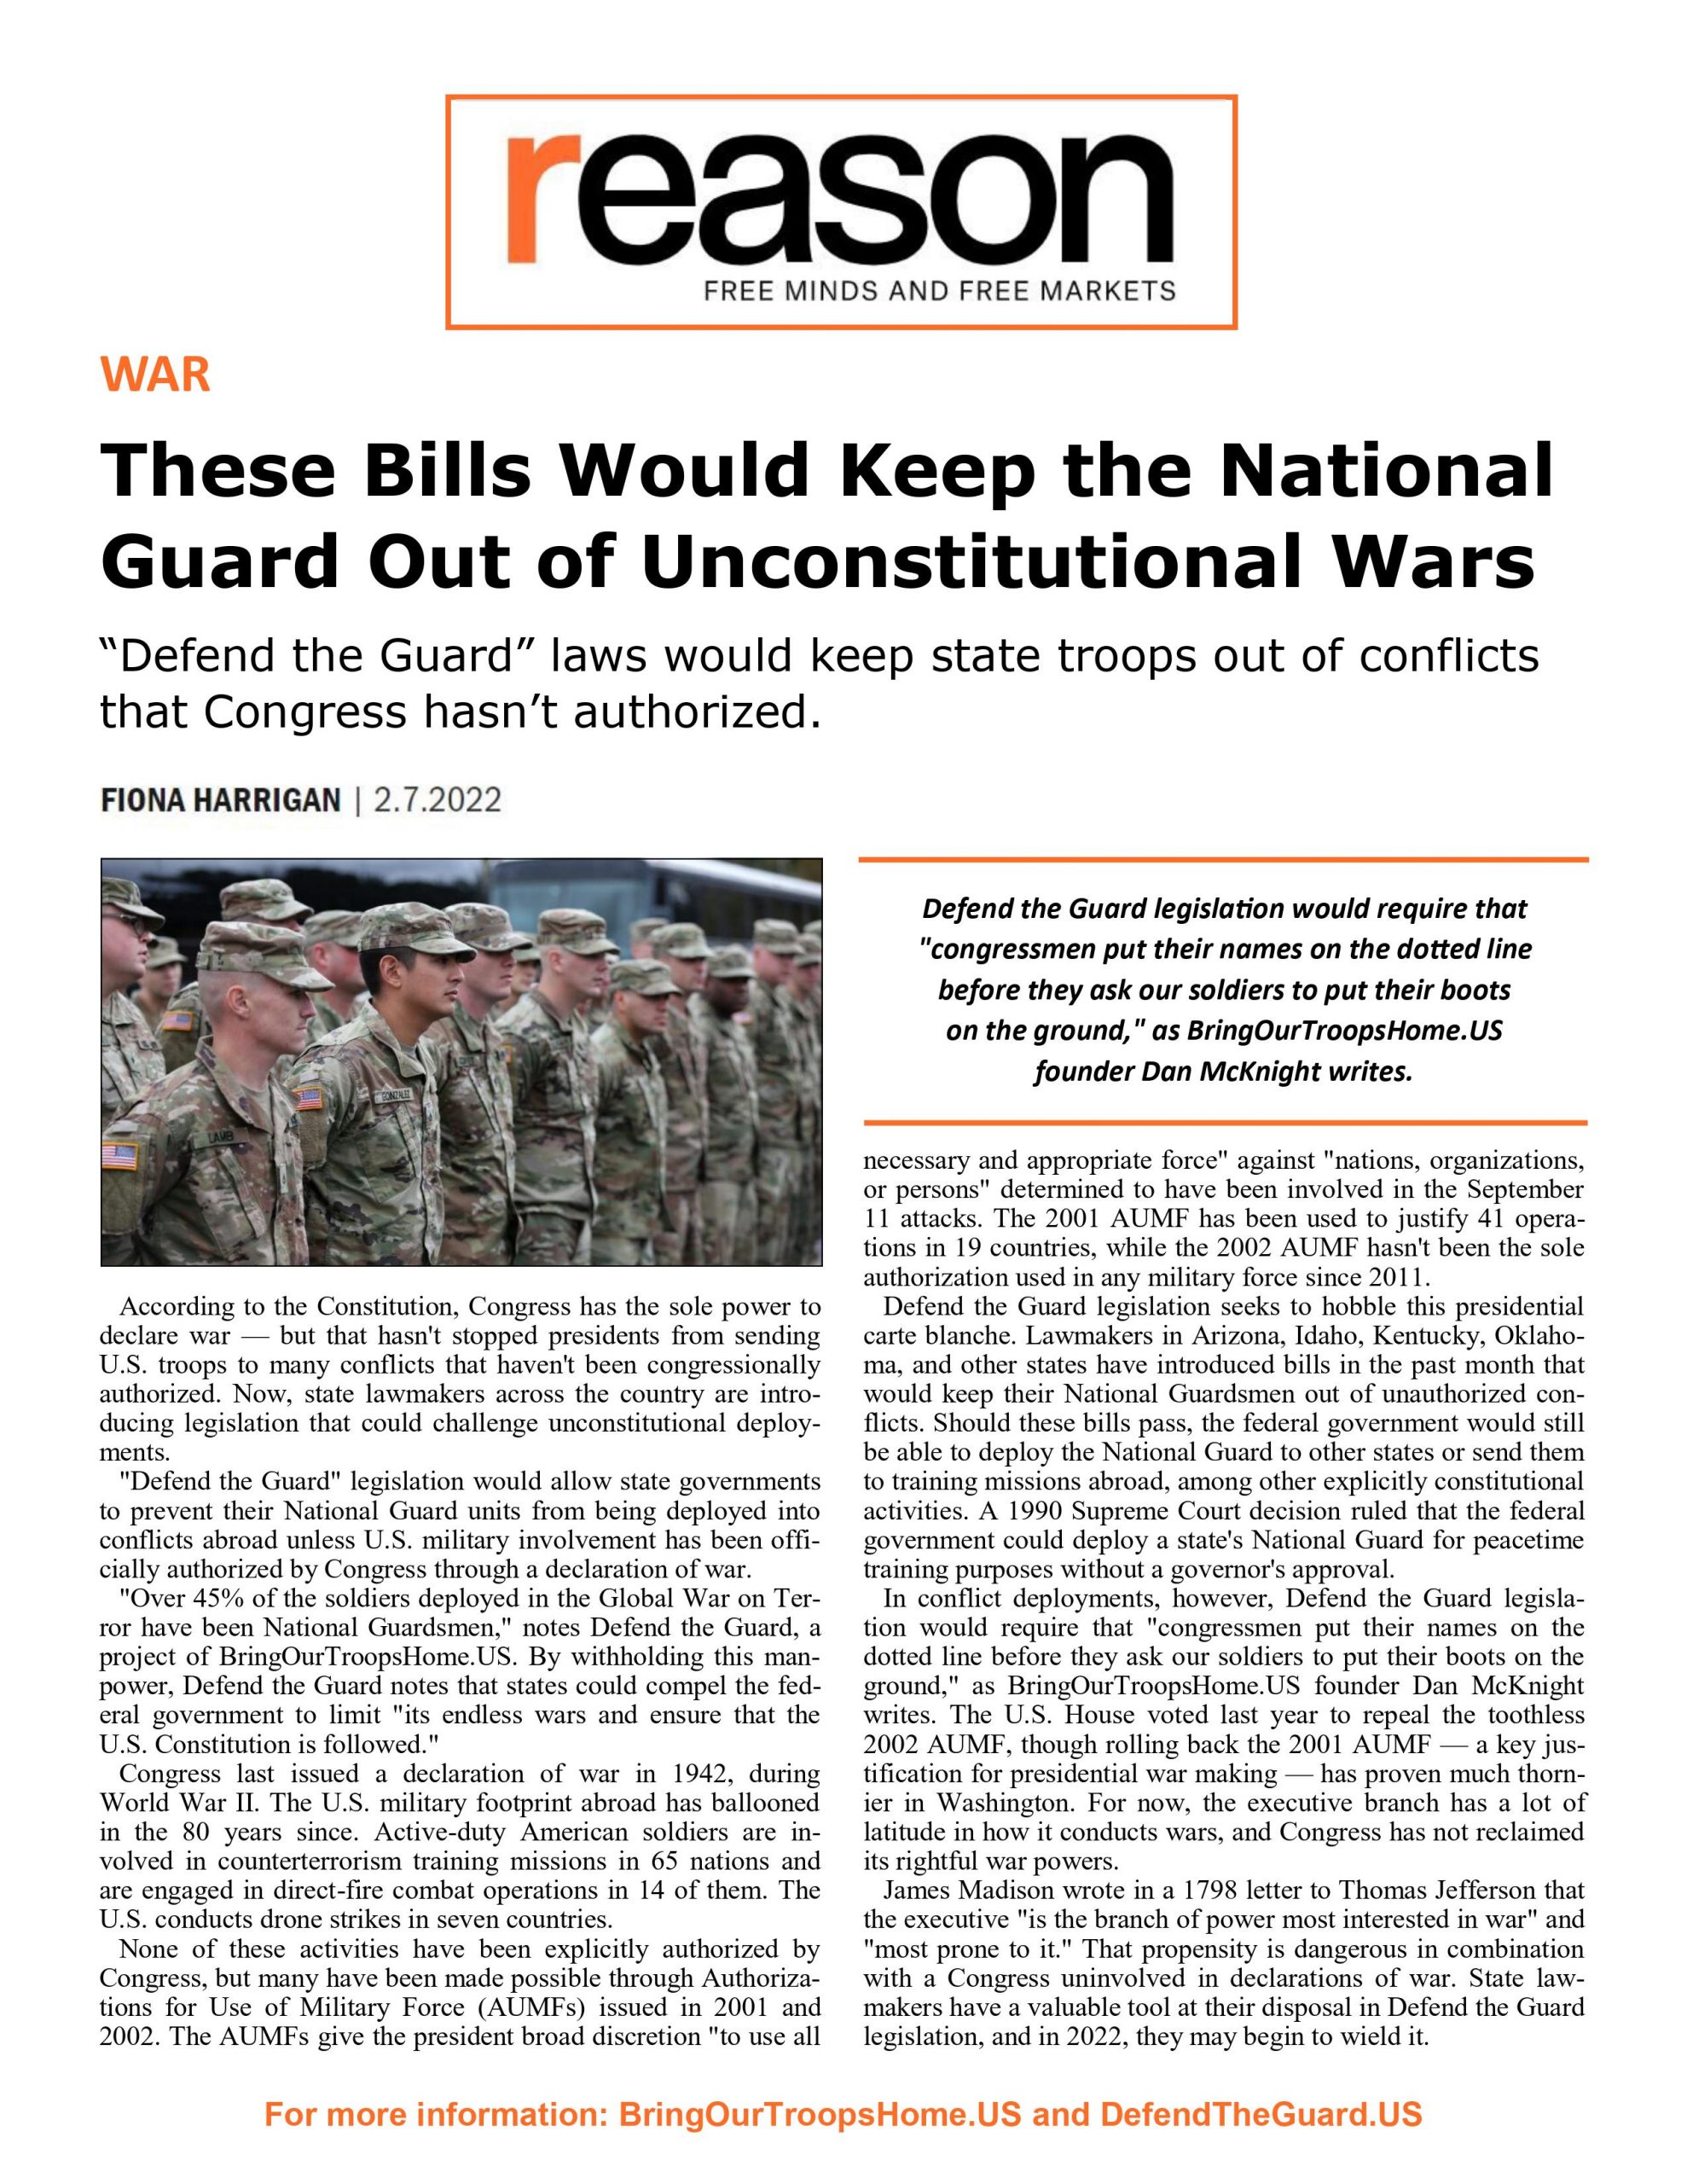 These Bills Would Keep the National Guard Out of Unconstitutional Wars